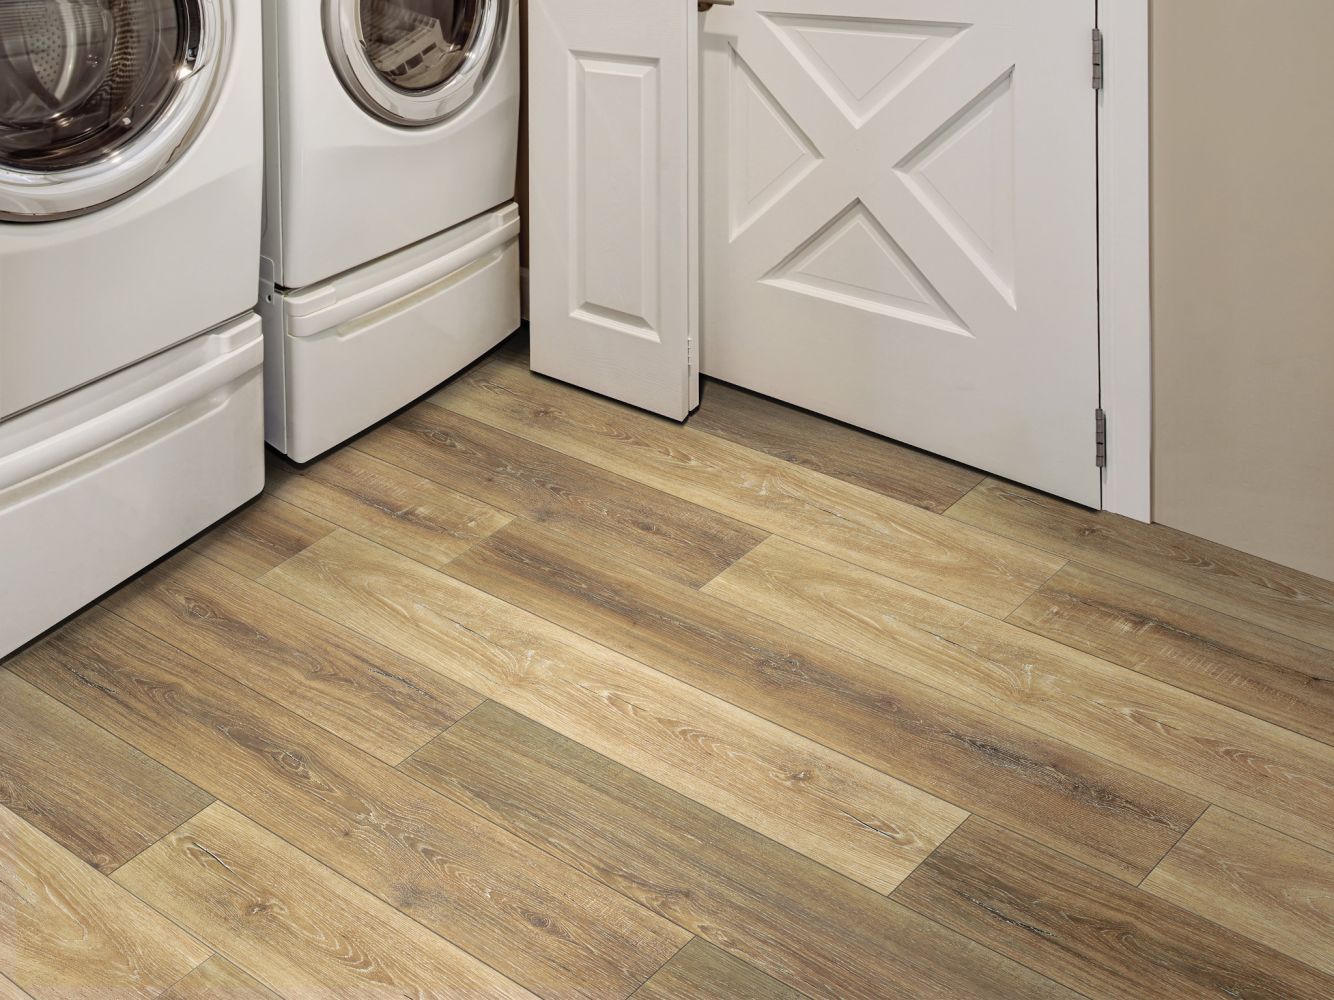 Shaw Floors Resilient Residential Tenacious Hd+ Accent Bamboo 07084_3011V